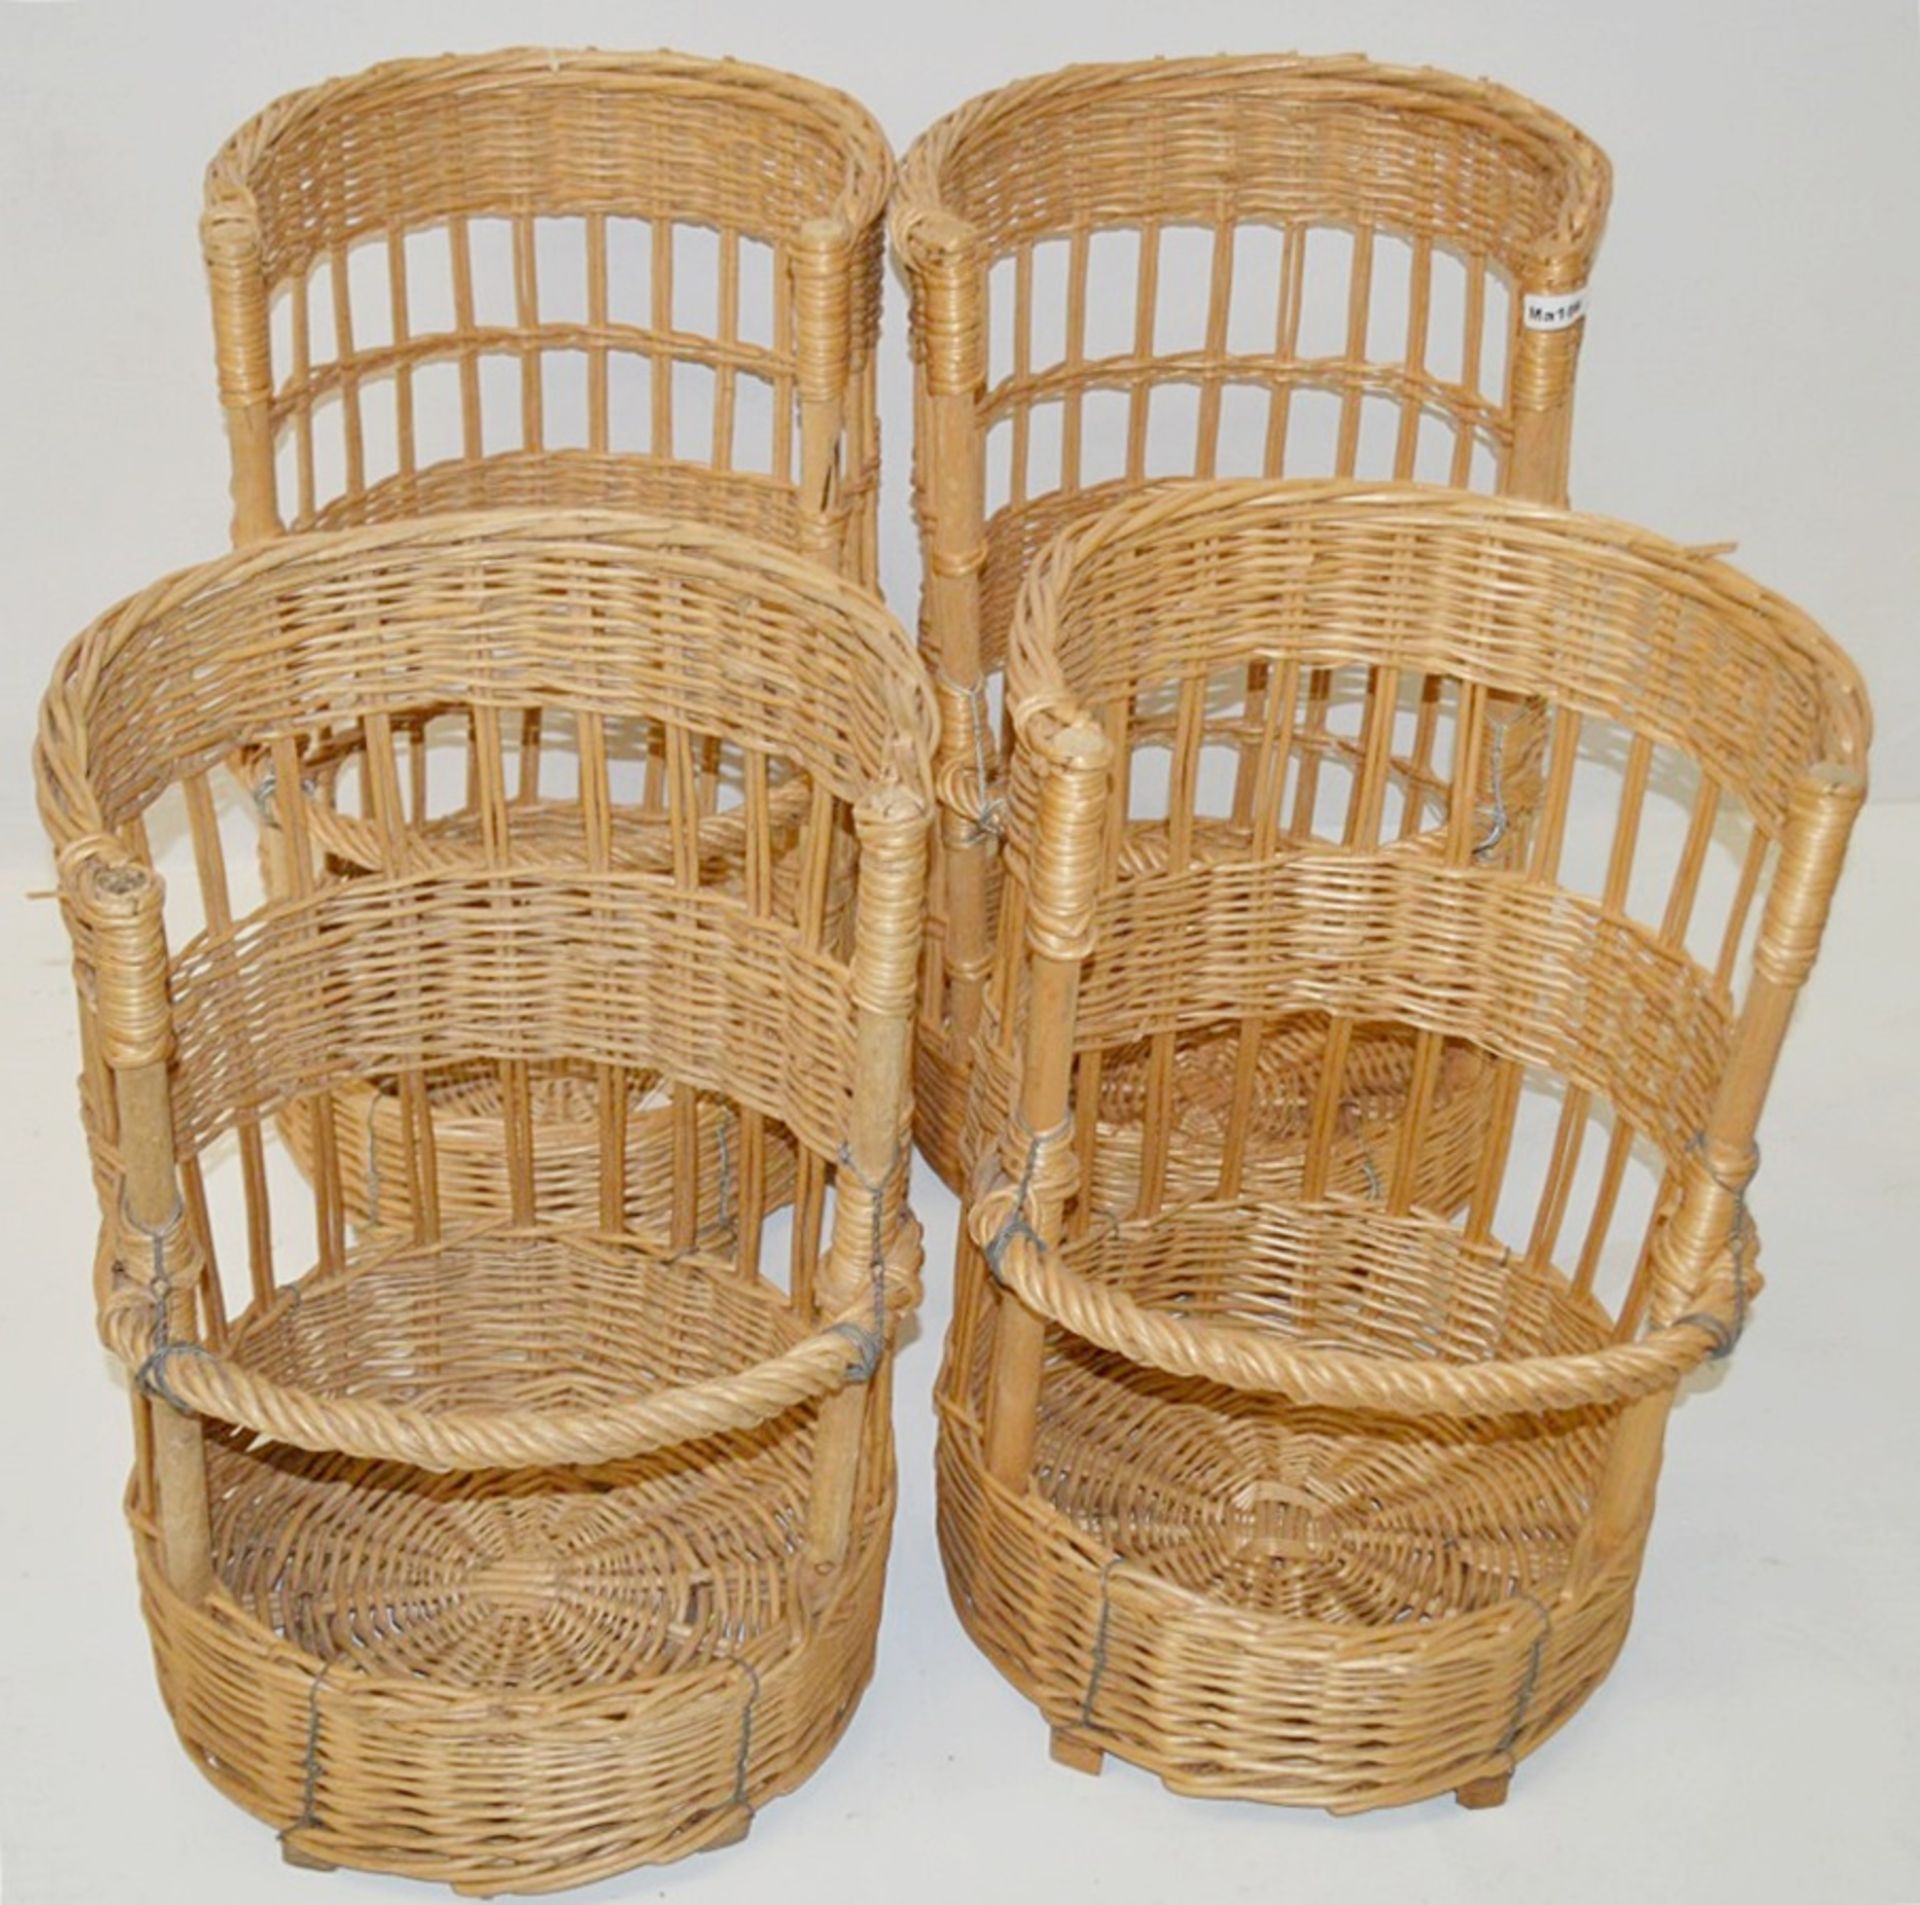 5 x Traditional French Bread Bagette Wicker Baskets - Dimensions: Diameter 45cm / Height 63cm - Ex-